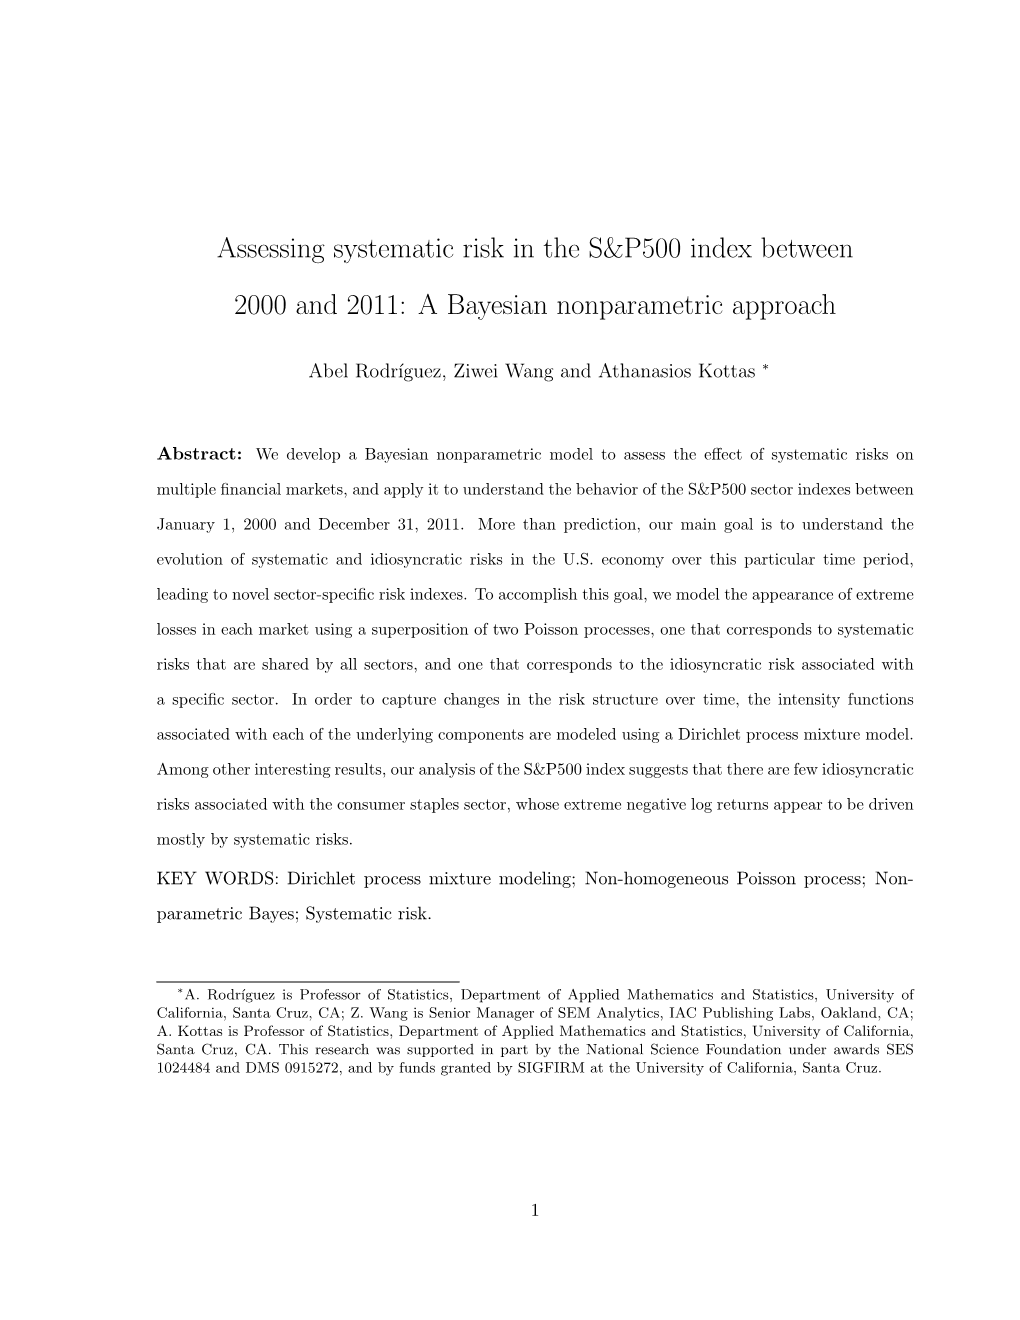 Assessing Systematic Risk in the S&P500 Index Between 2000 And